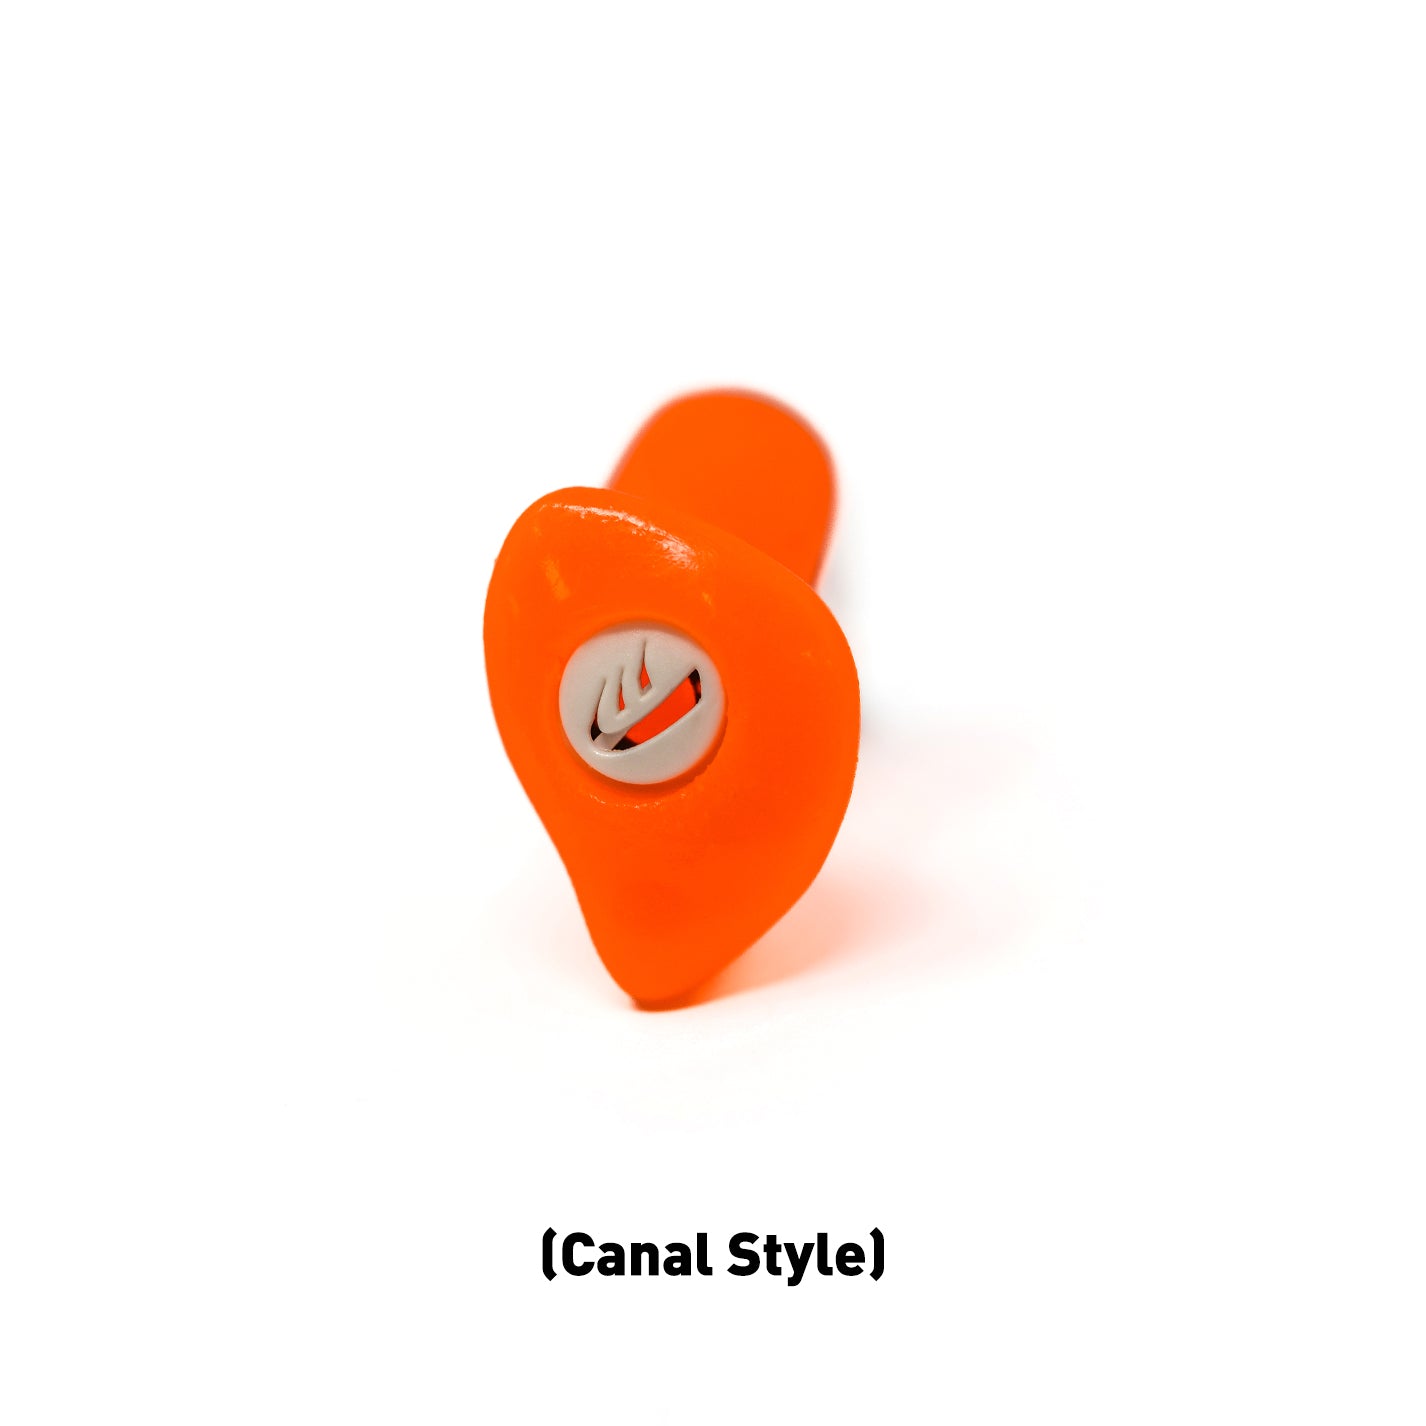 A canal style Filtered Earplug shown in orange